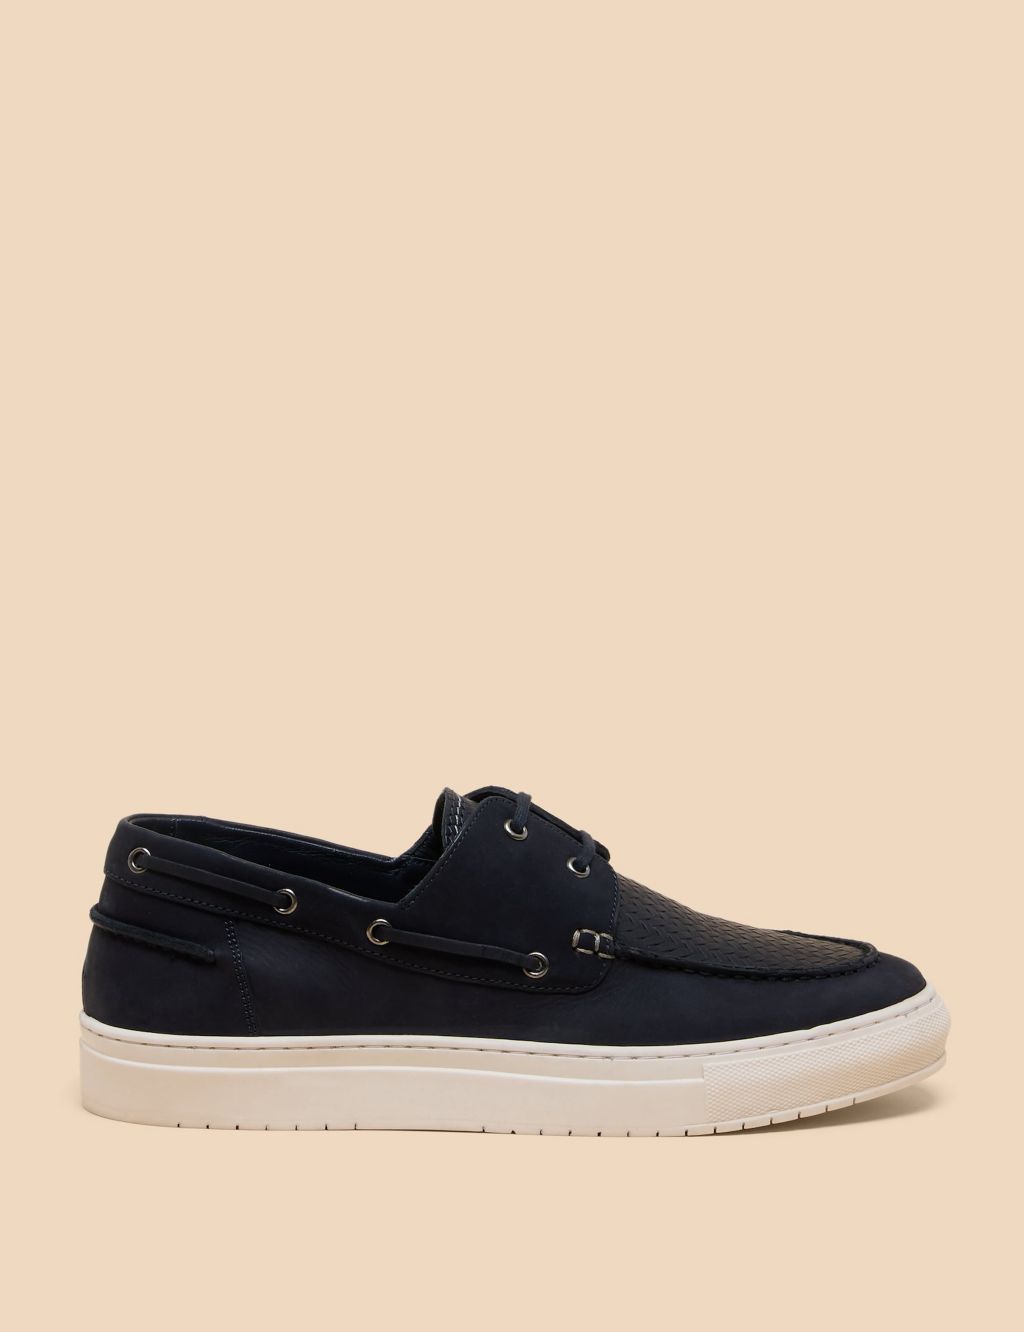 Leather Slip On Boat Shoes